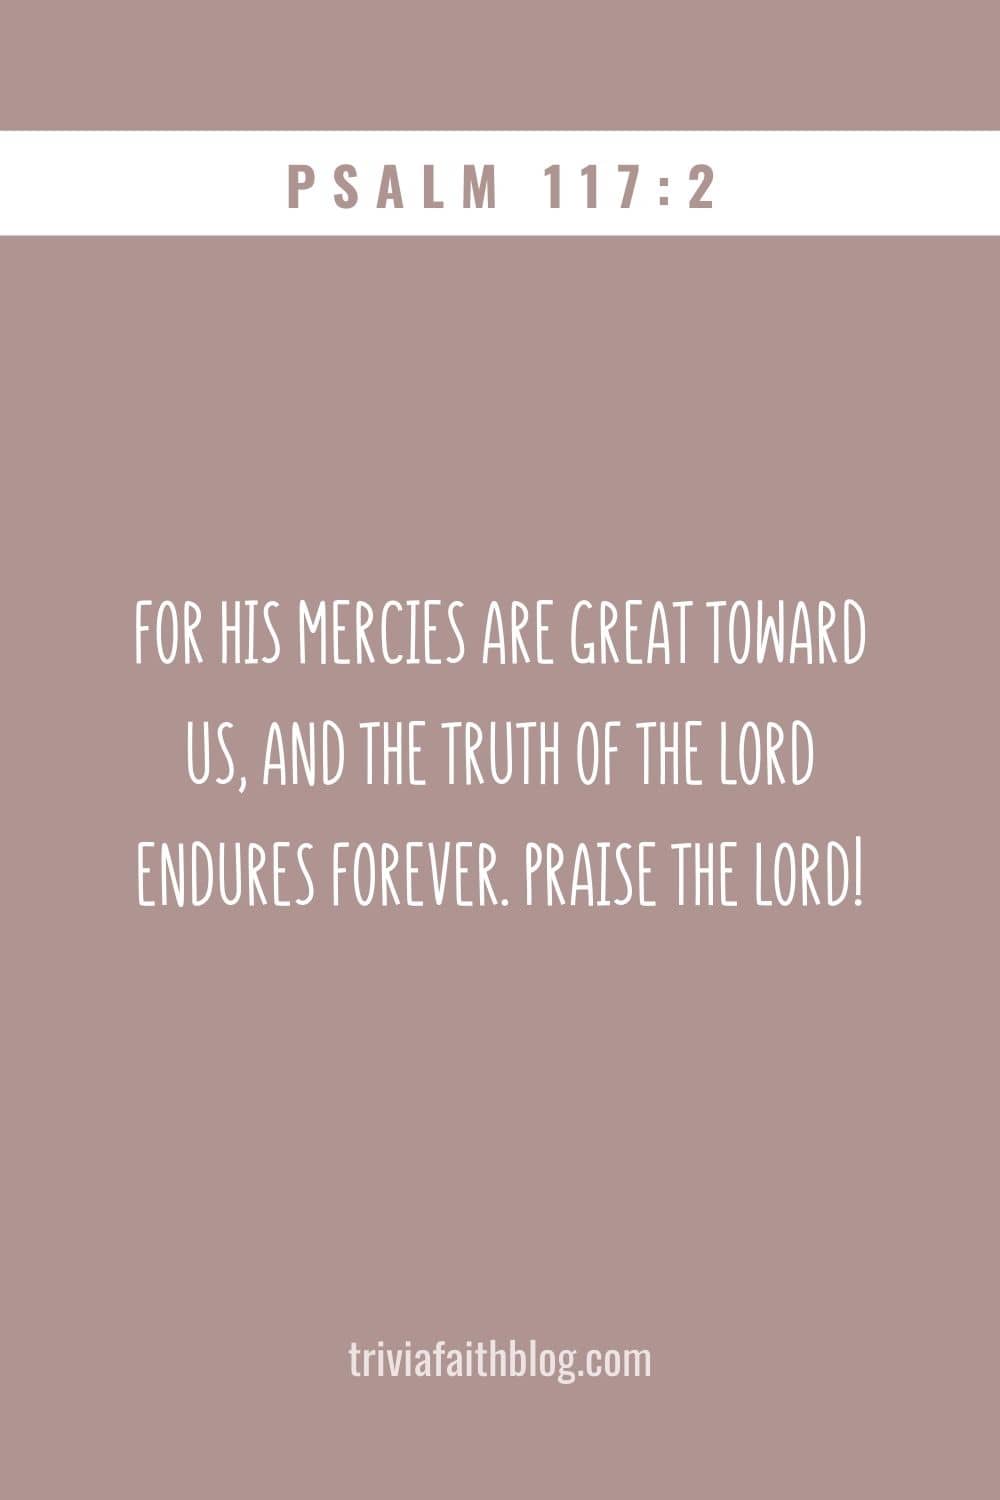 For His mercies are great toward us